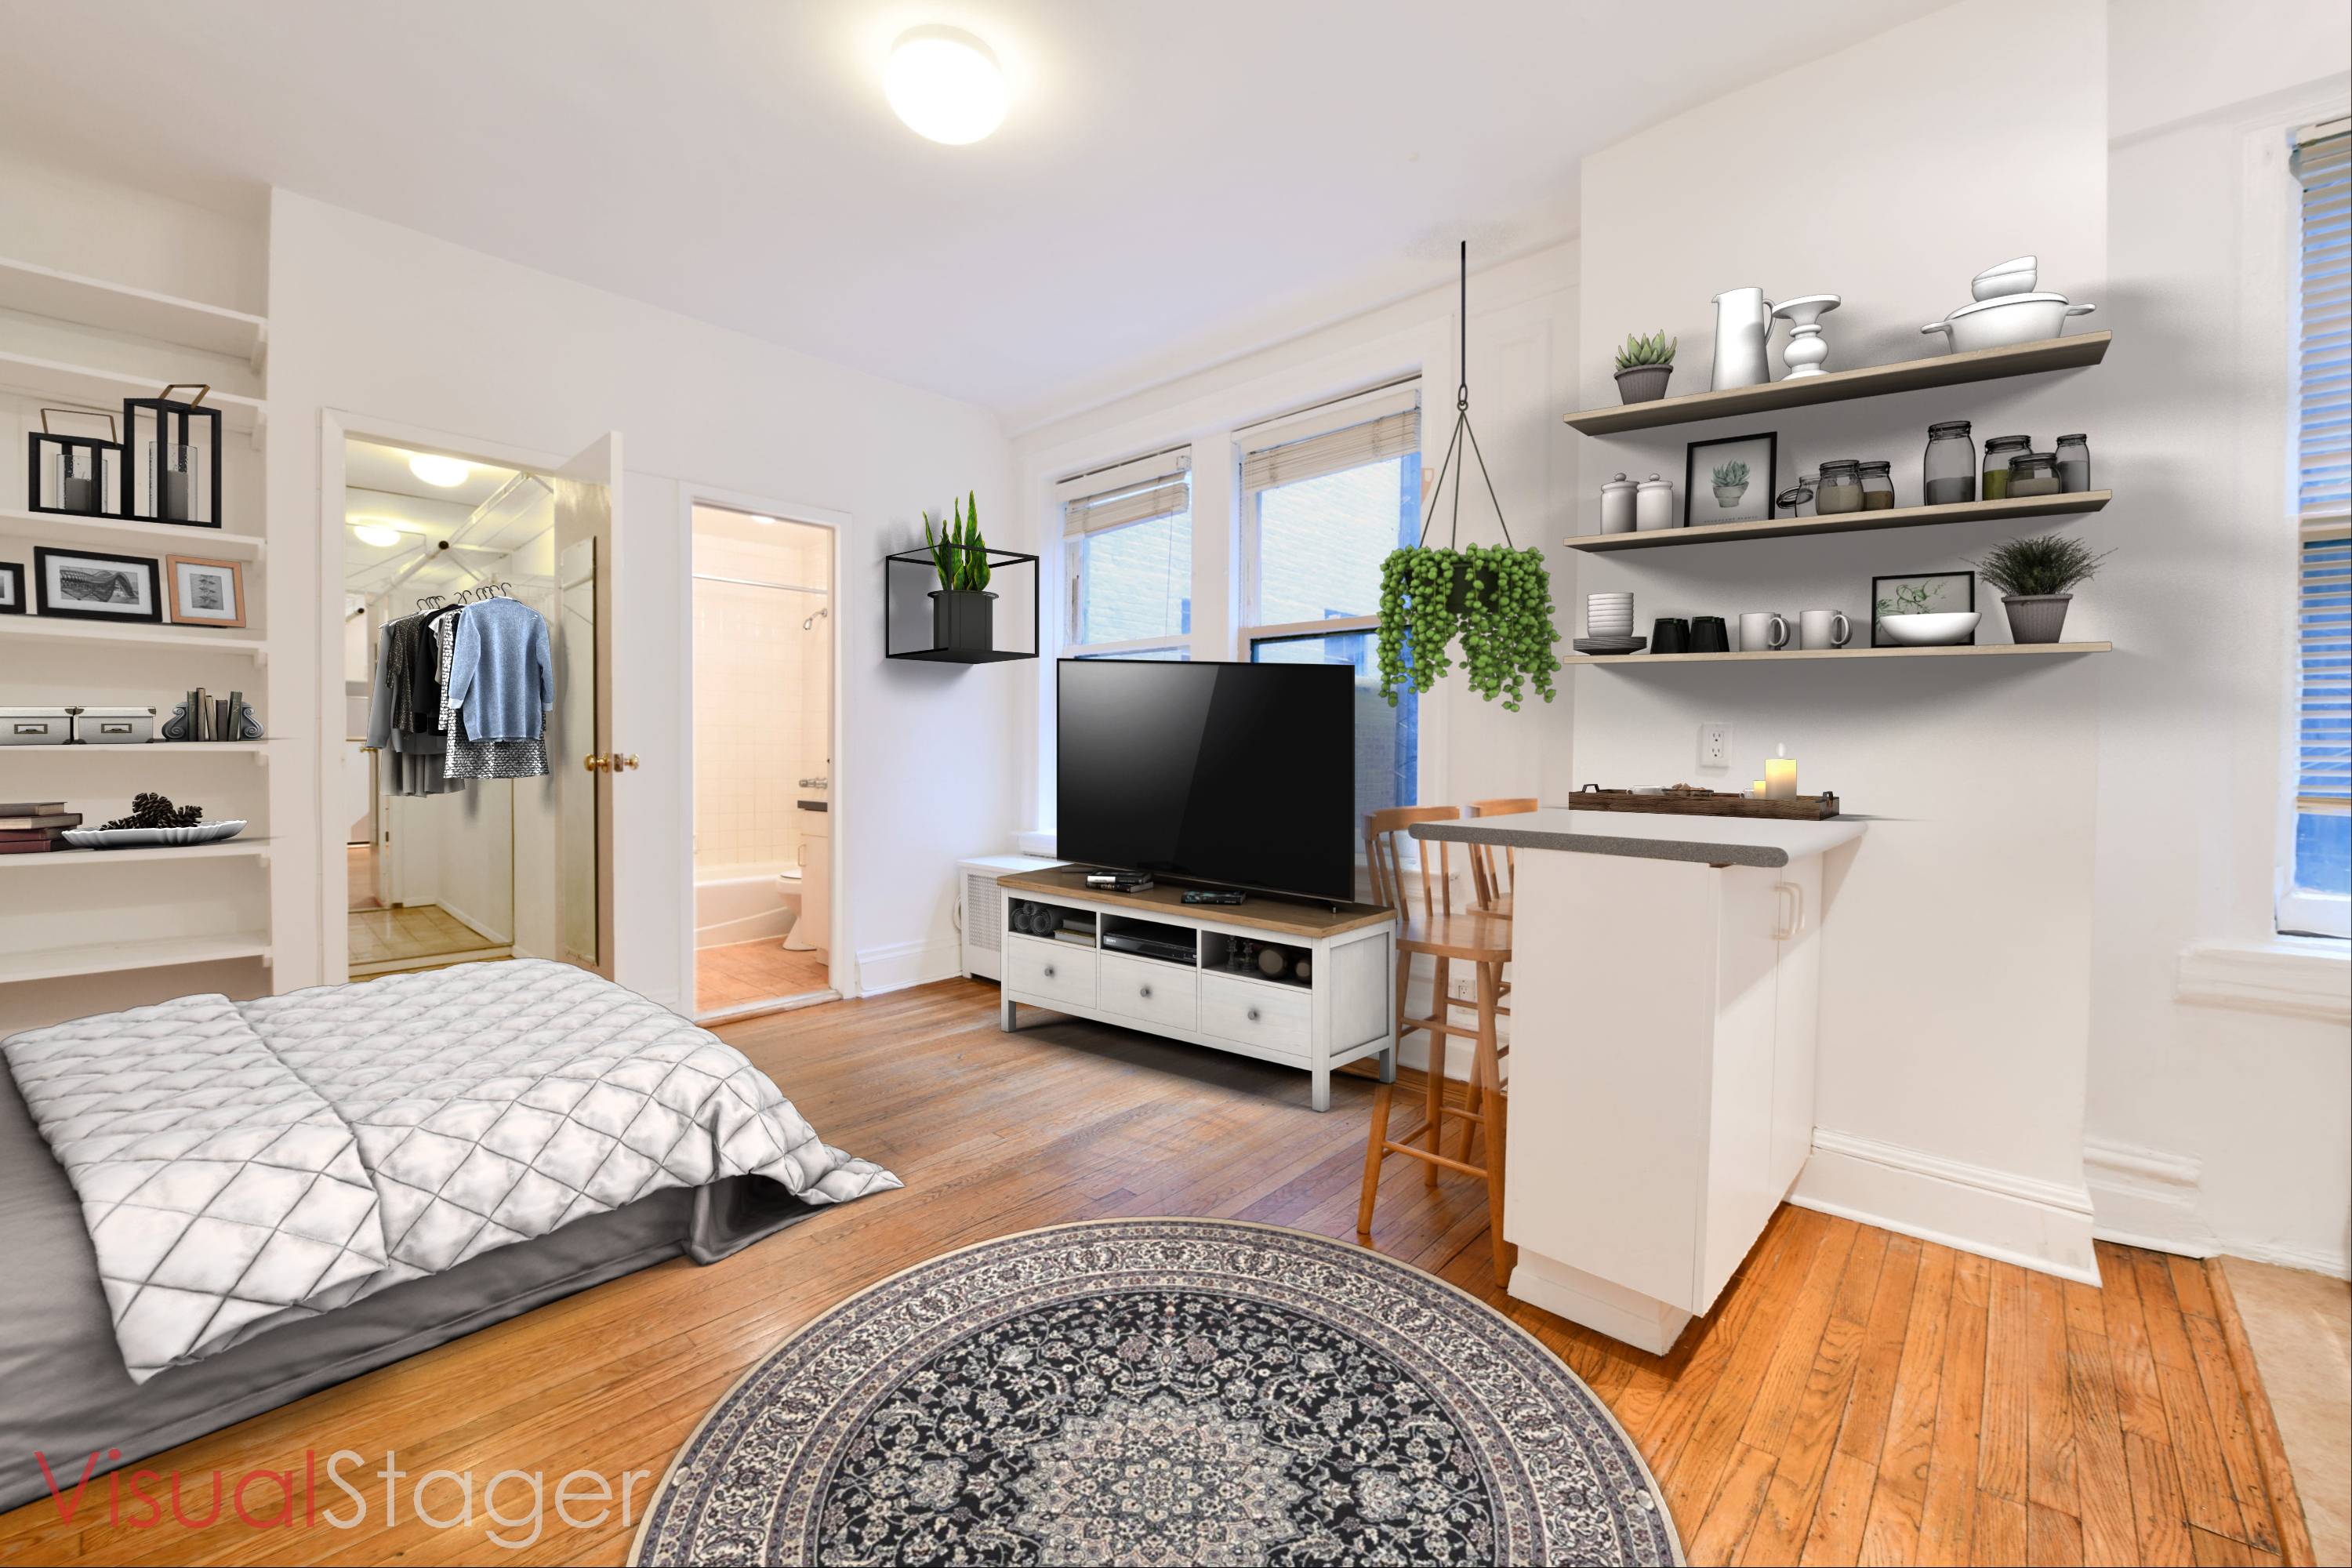 Charming Studio Prime Upper West Side Location, Quiet amp ; Cozy Home featuring hardwood floors, walk in closet and three large windows for natural exposure.